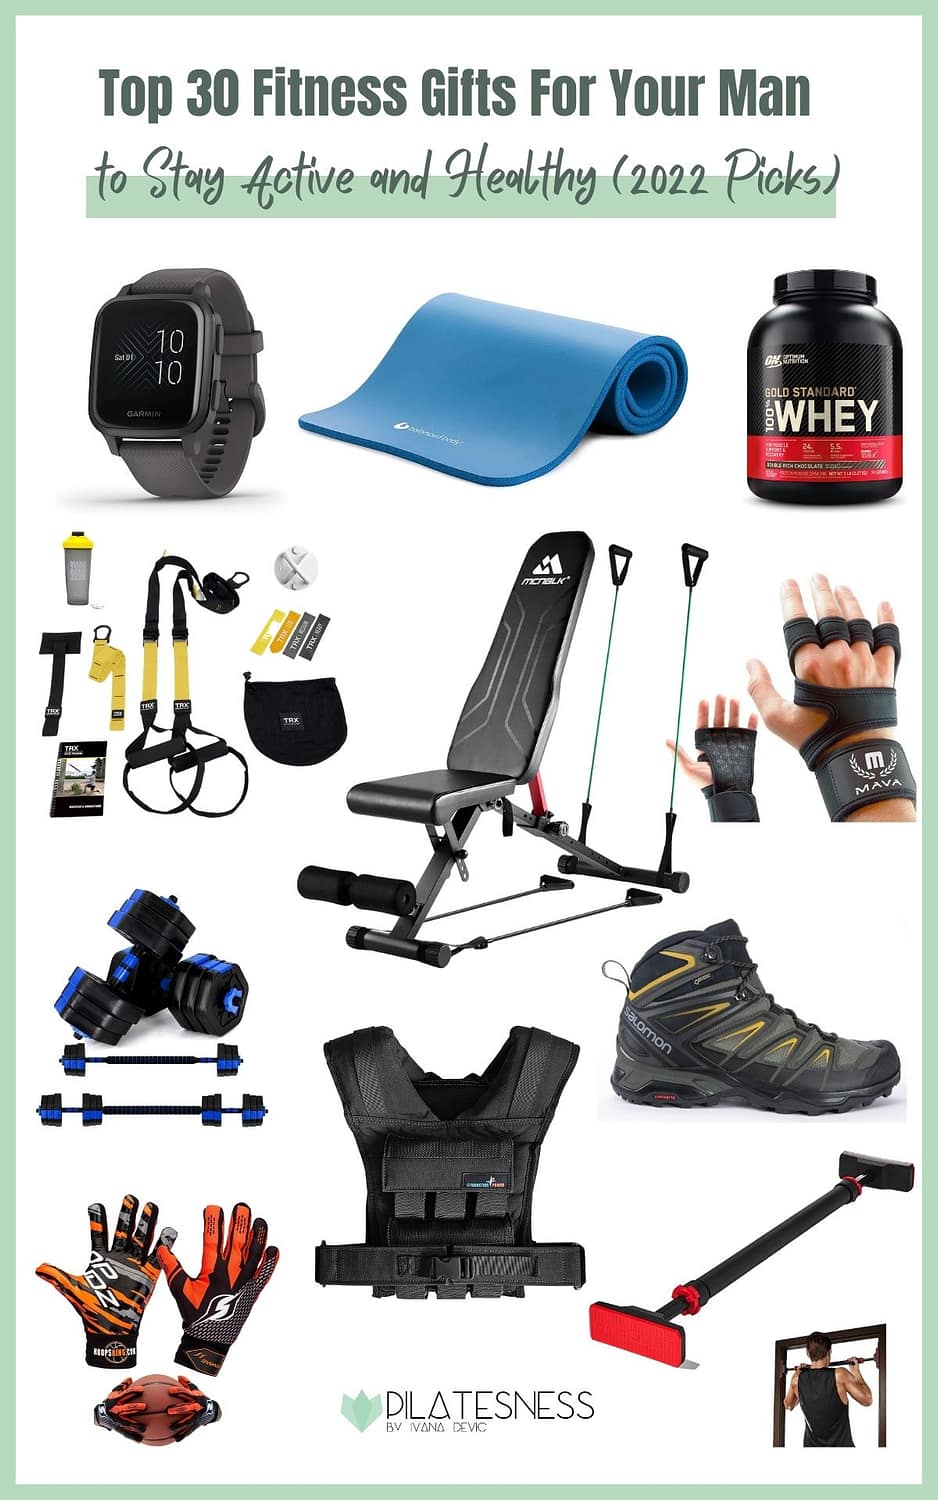 Ask me about crossfit | Notebook: Crossfit gifts for men and women | Lined  notebook/journal/logbook: gifts, crossfit: 9781672033398: Amazon.com: Books